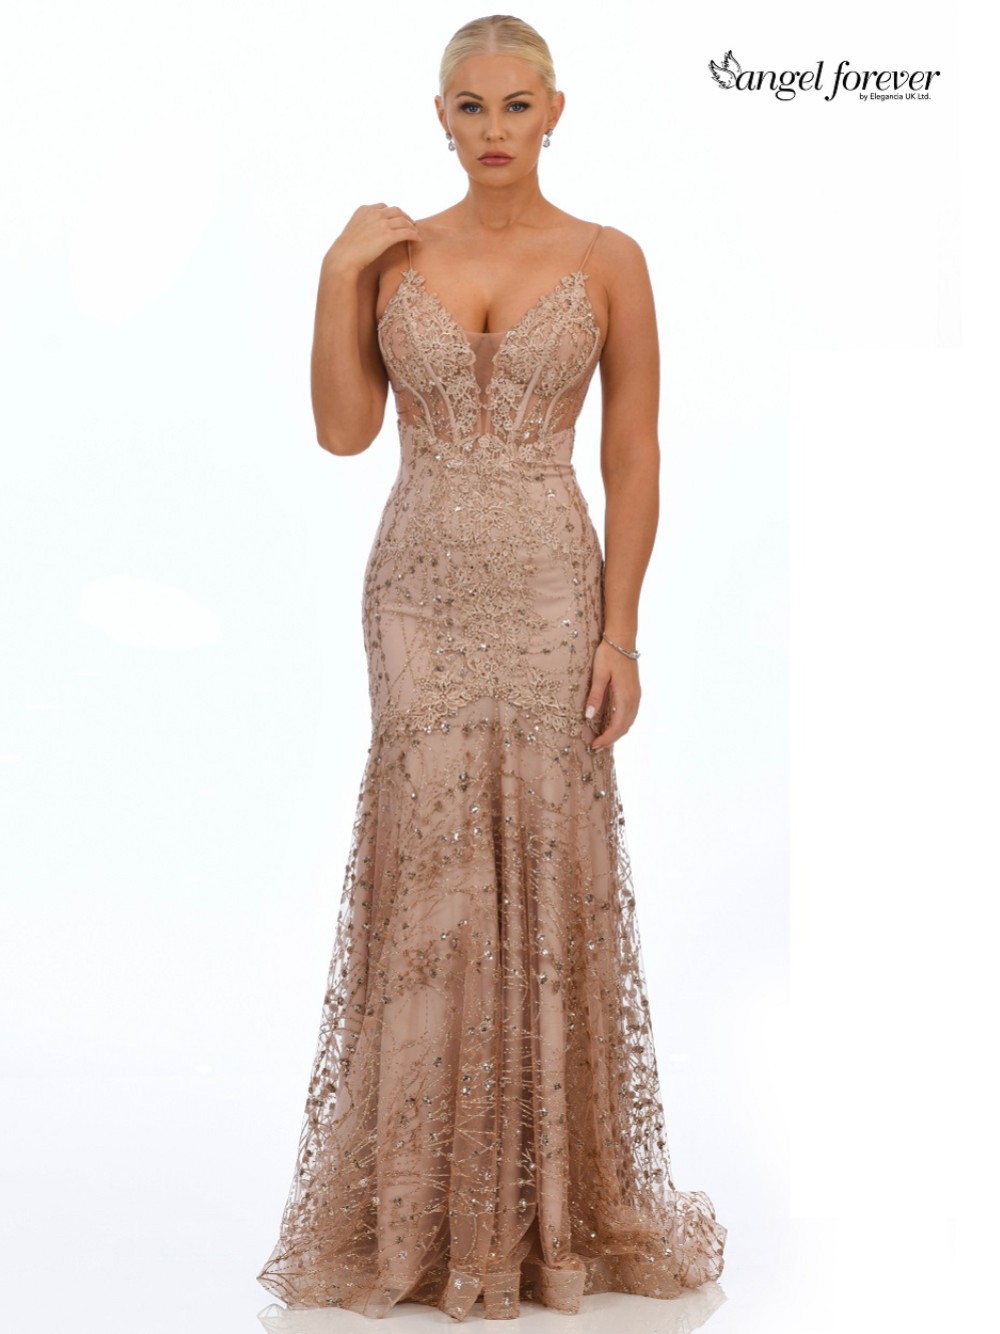 Photograph of Angel Forever Glitter Lace Fitted Corset Prom Dress (Rose Gold)